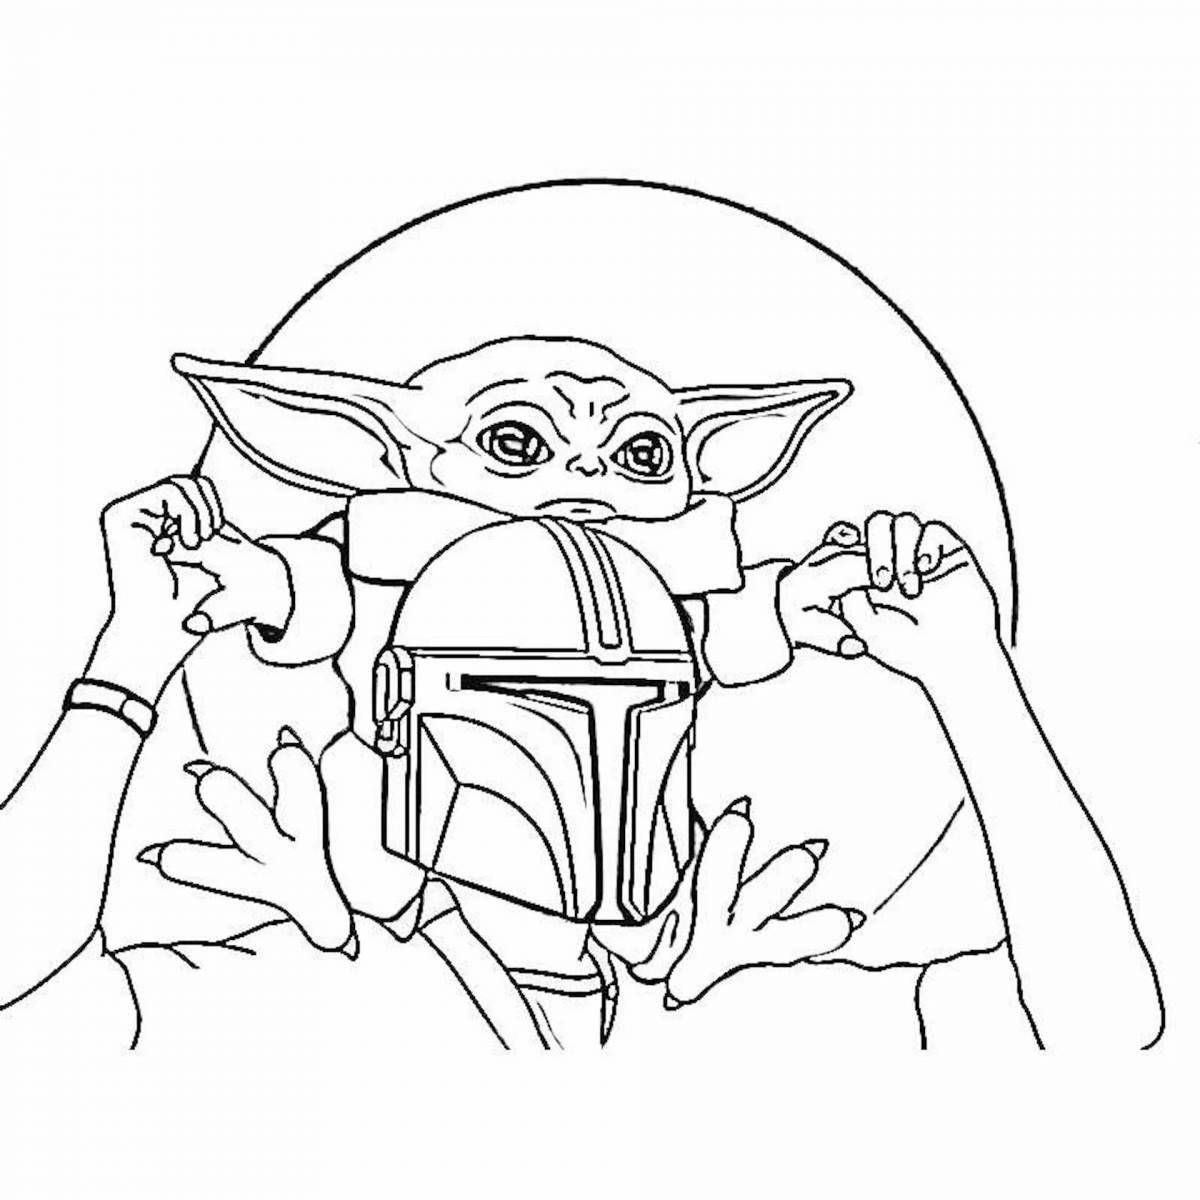 Radiant coloring page by numbers star wars